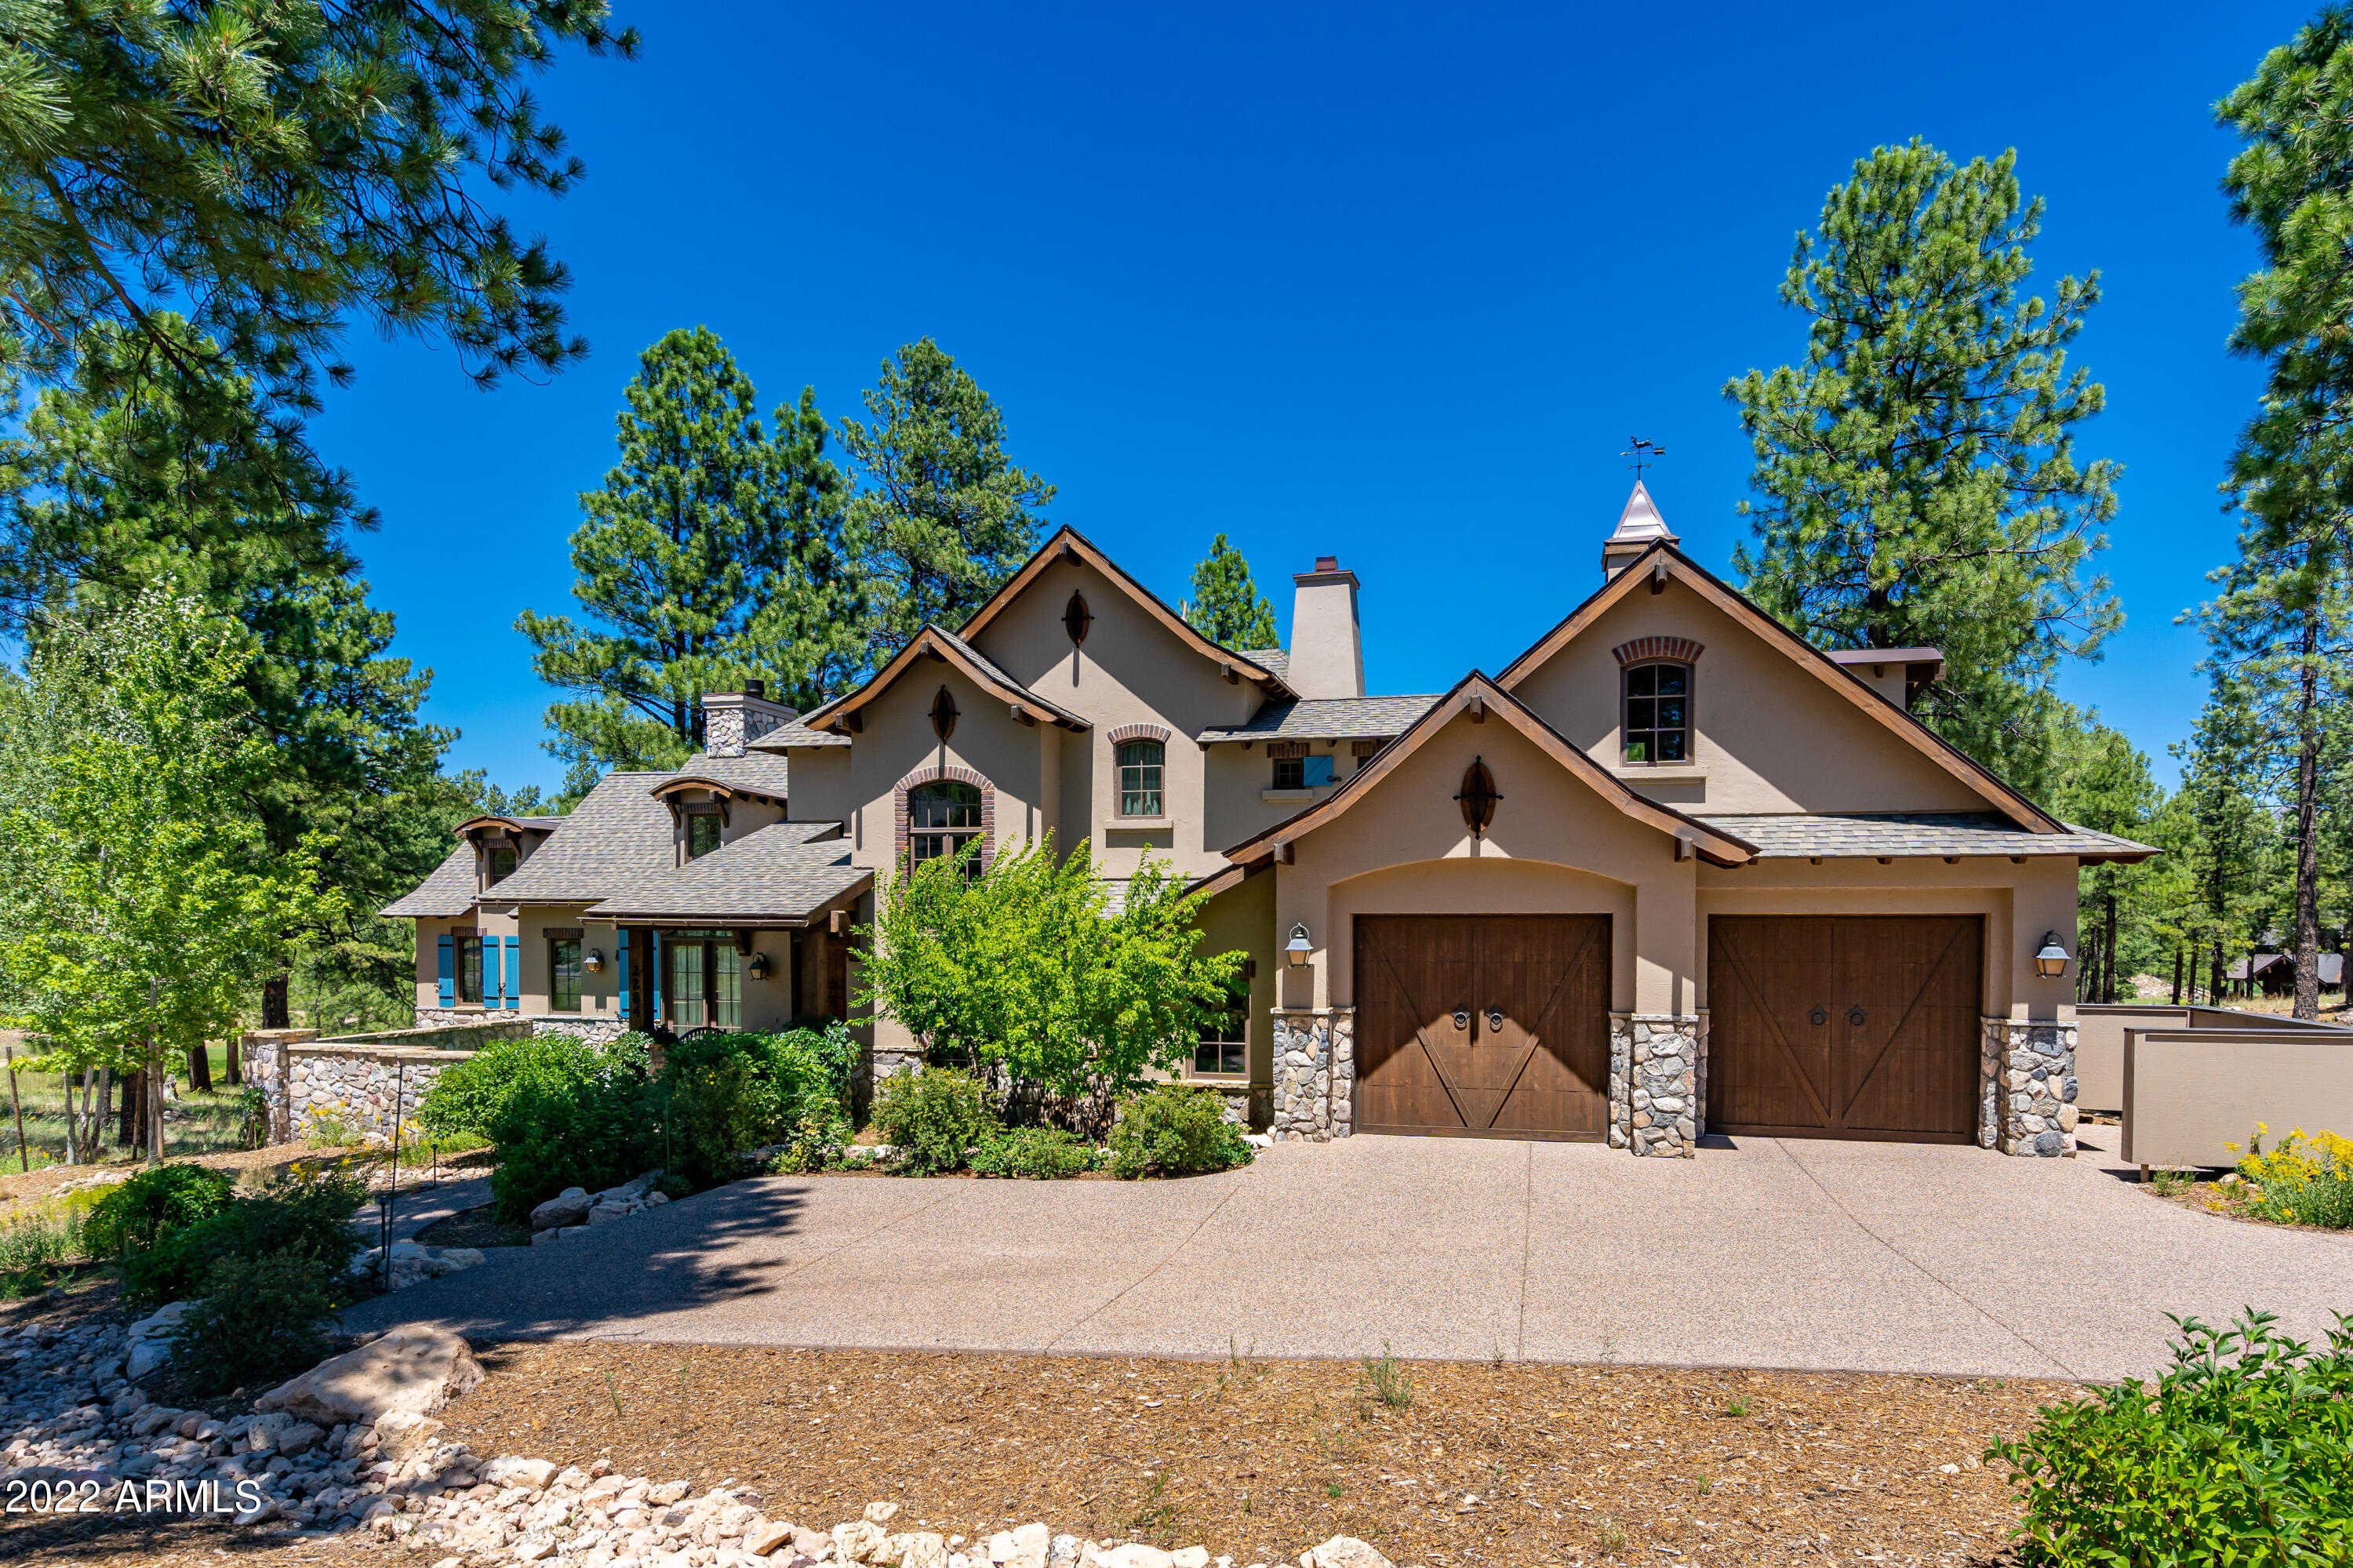 $3,400,000 - 5Br/5Ba - Home for Sale in Pine Canyon, Flagstaff